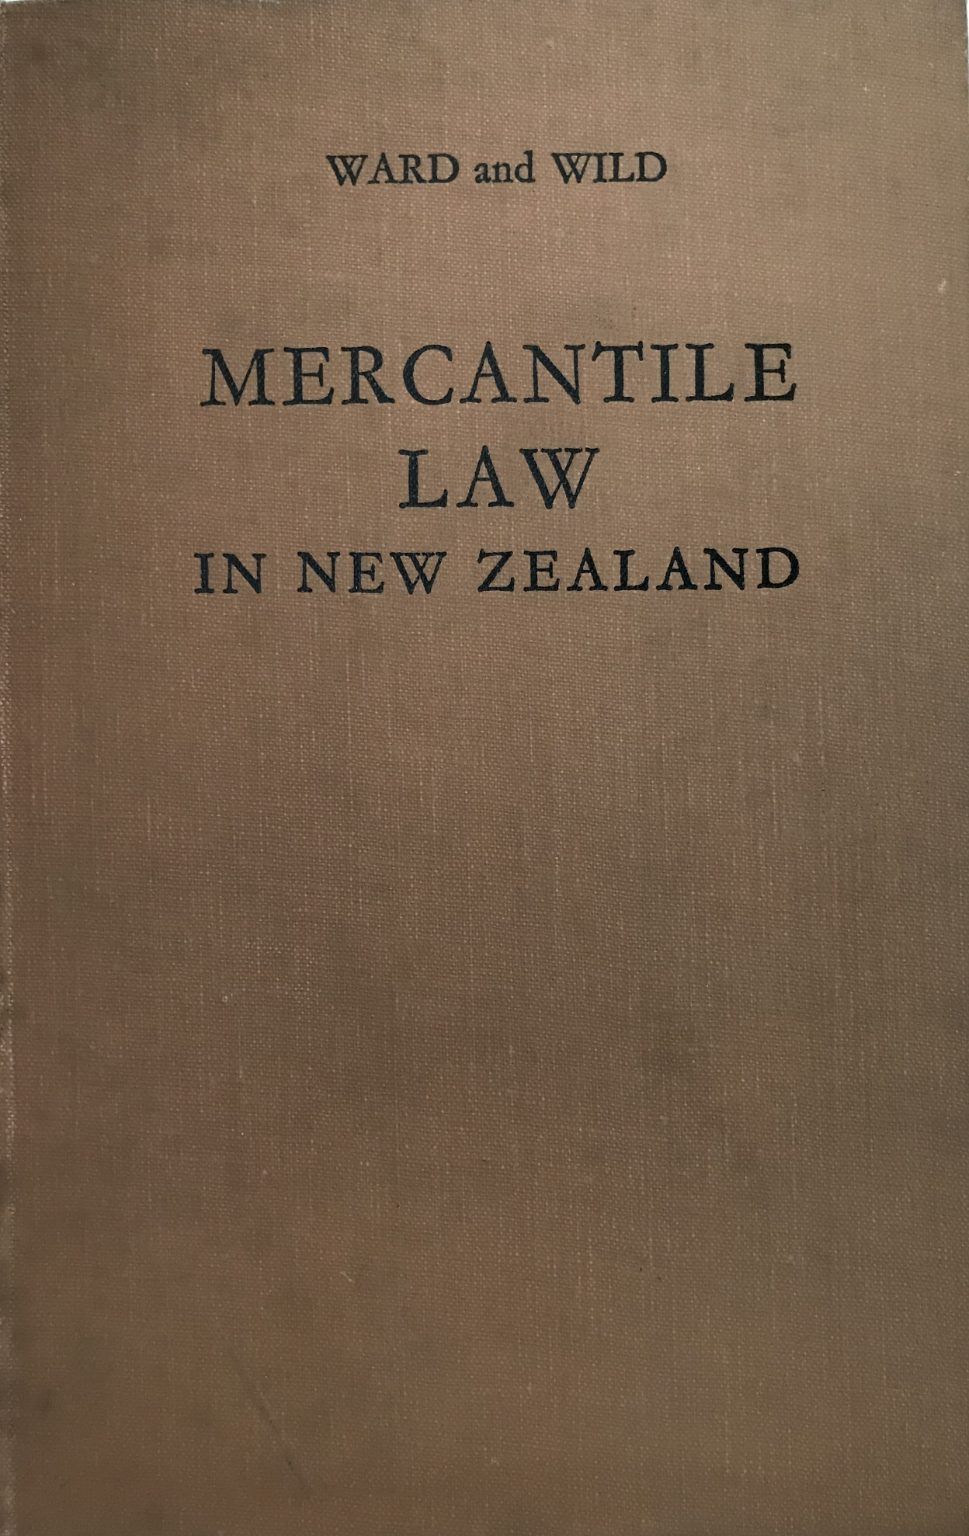 MERCANTILE LAW IN NEW ZEALAND